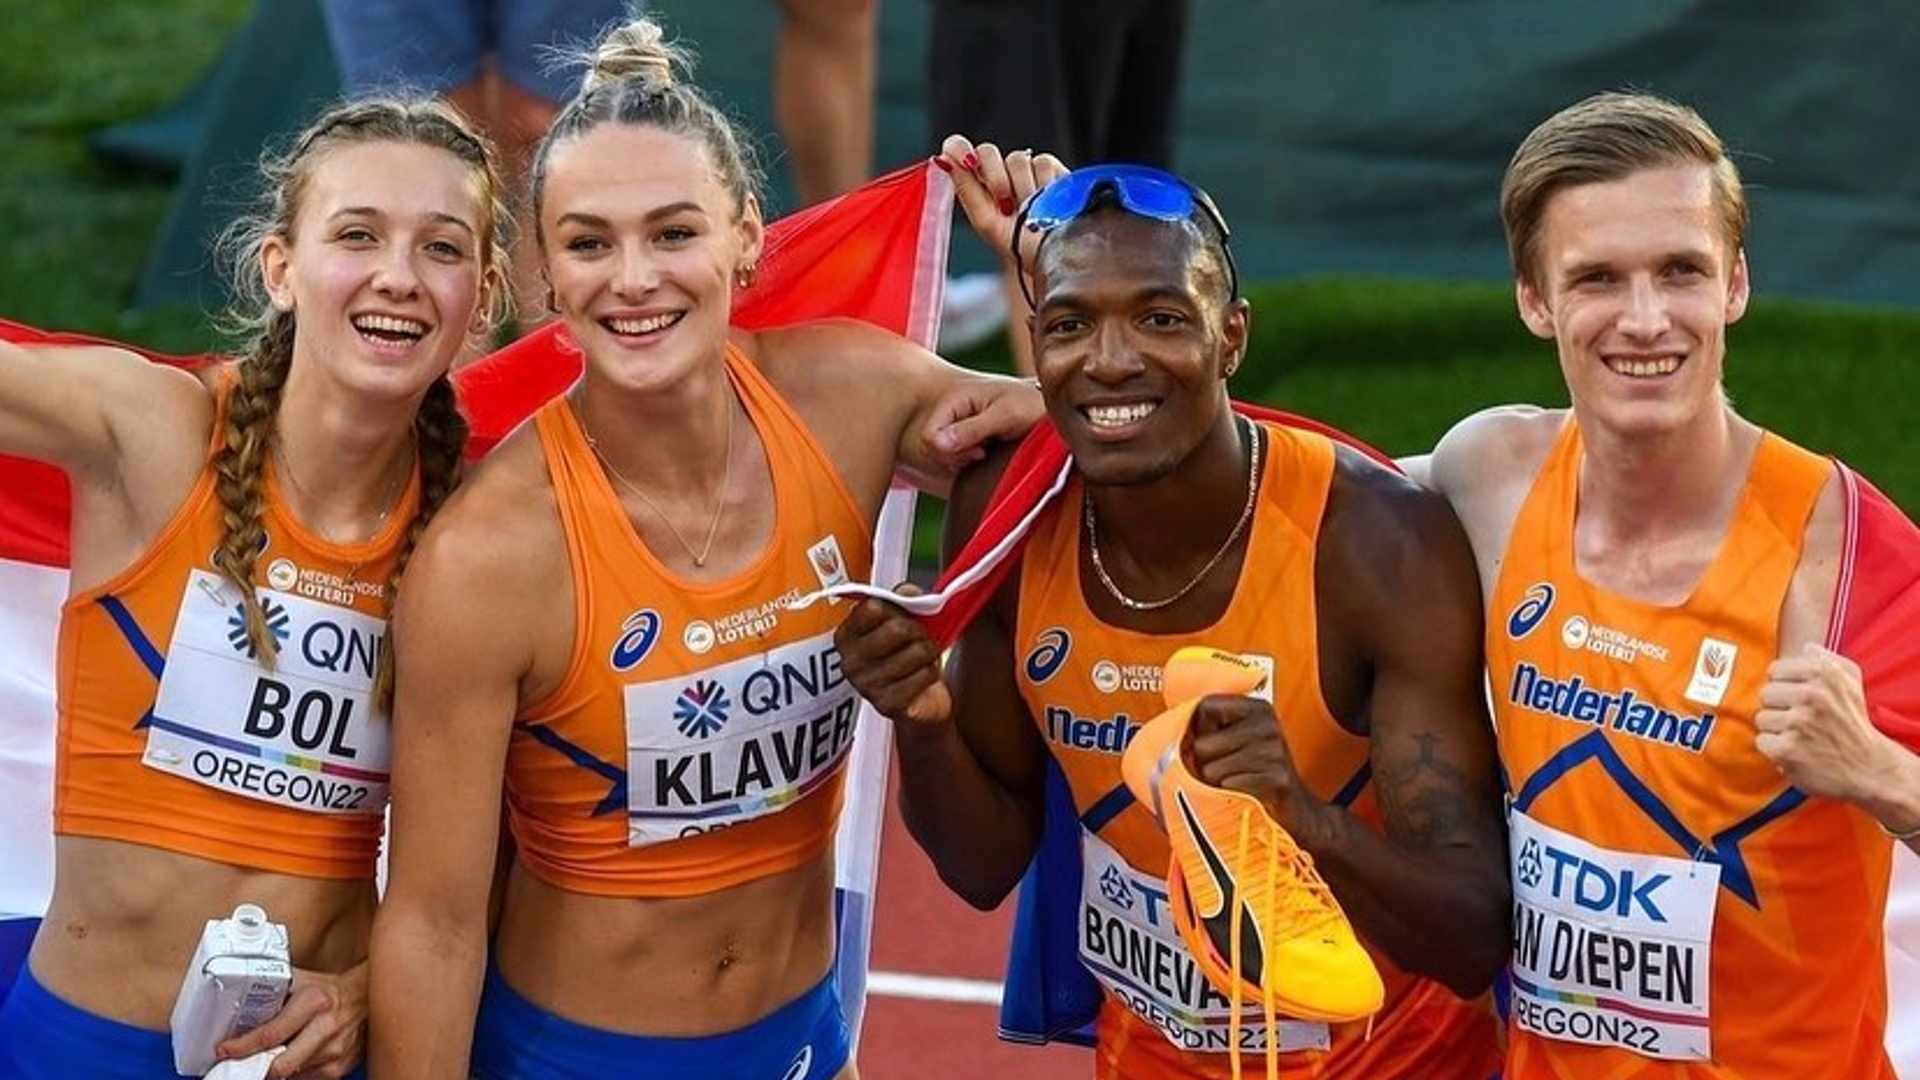 The Dutch 4 X 400m mixed relay team after winning the silver medal at the World Championships 2022 (Image Credits - Instagram/ @liekeklaver)